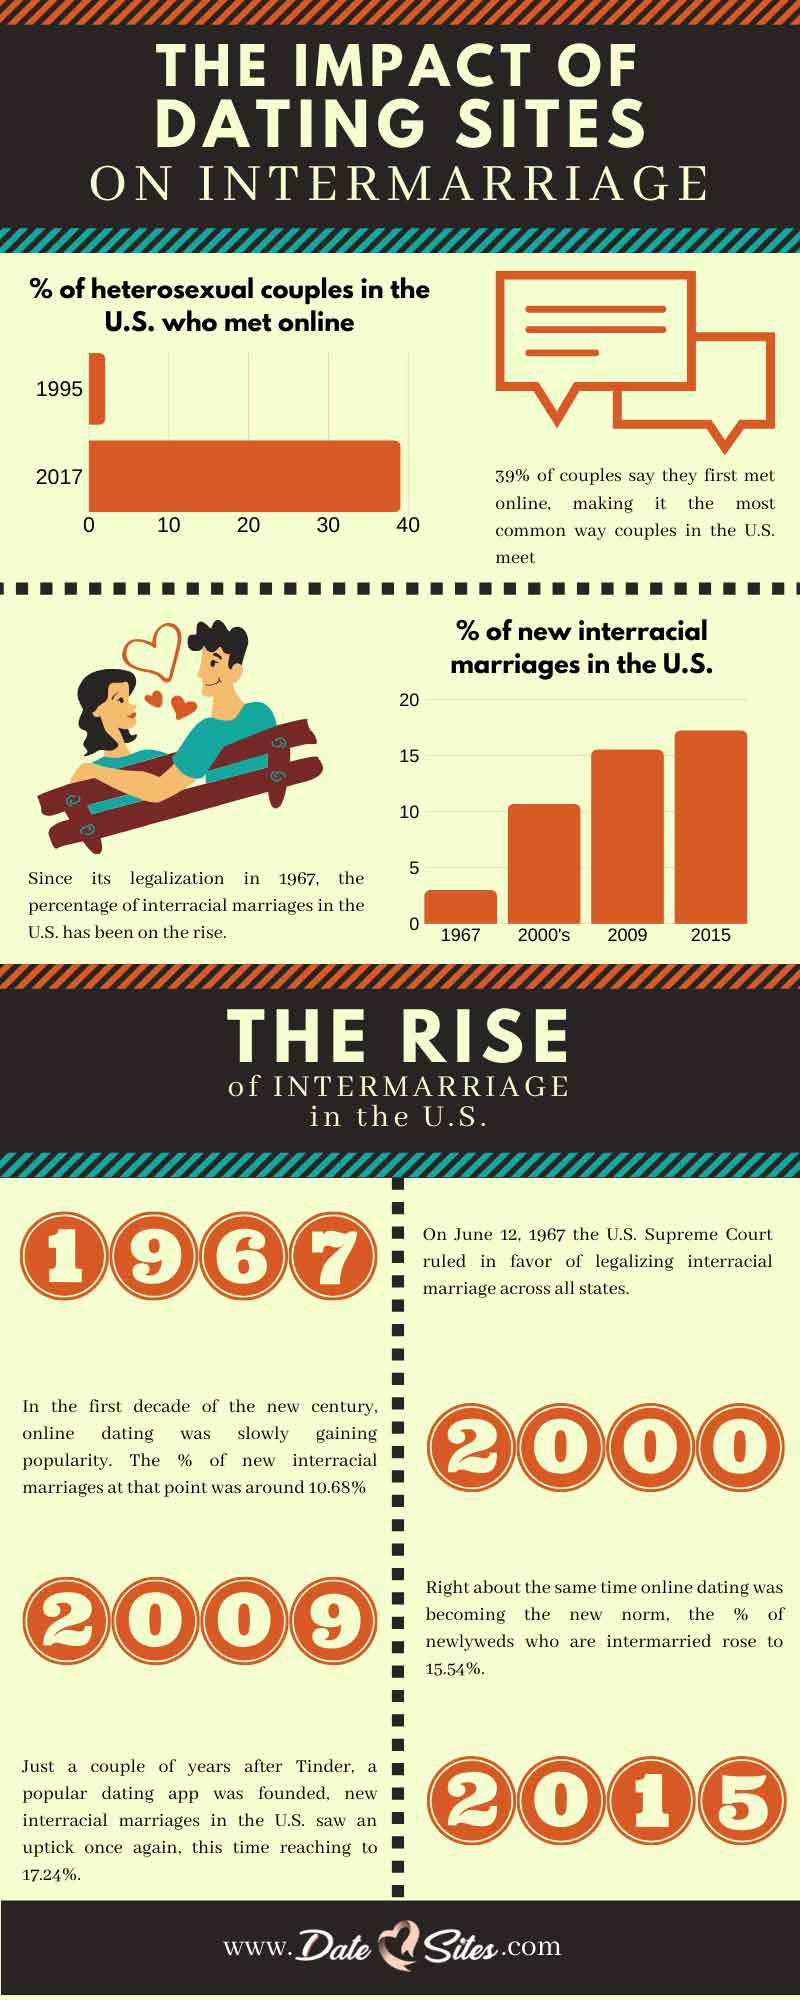  An infographic about the impact of online dating sites on interracial marriages in the U.S.